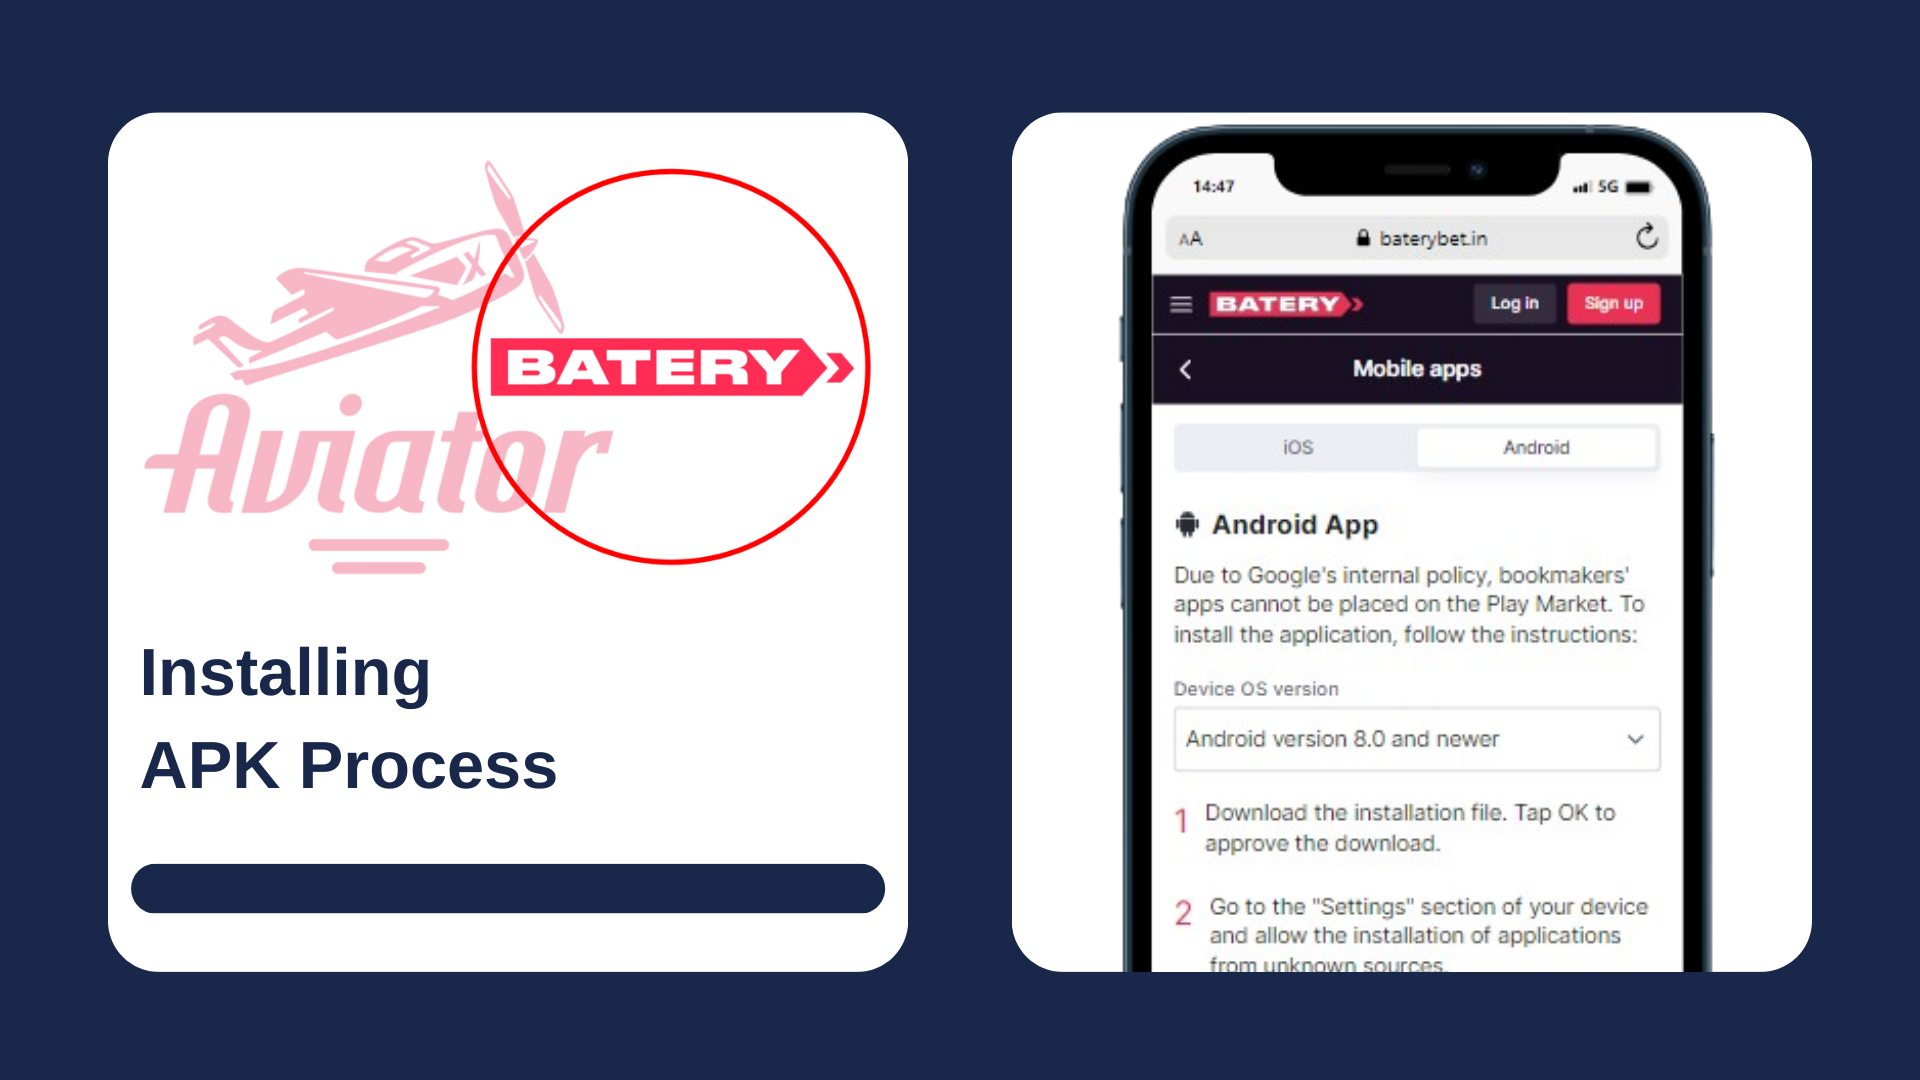 First picture showing Aviator and Batery logos with text, and second - how to install app on Android